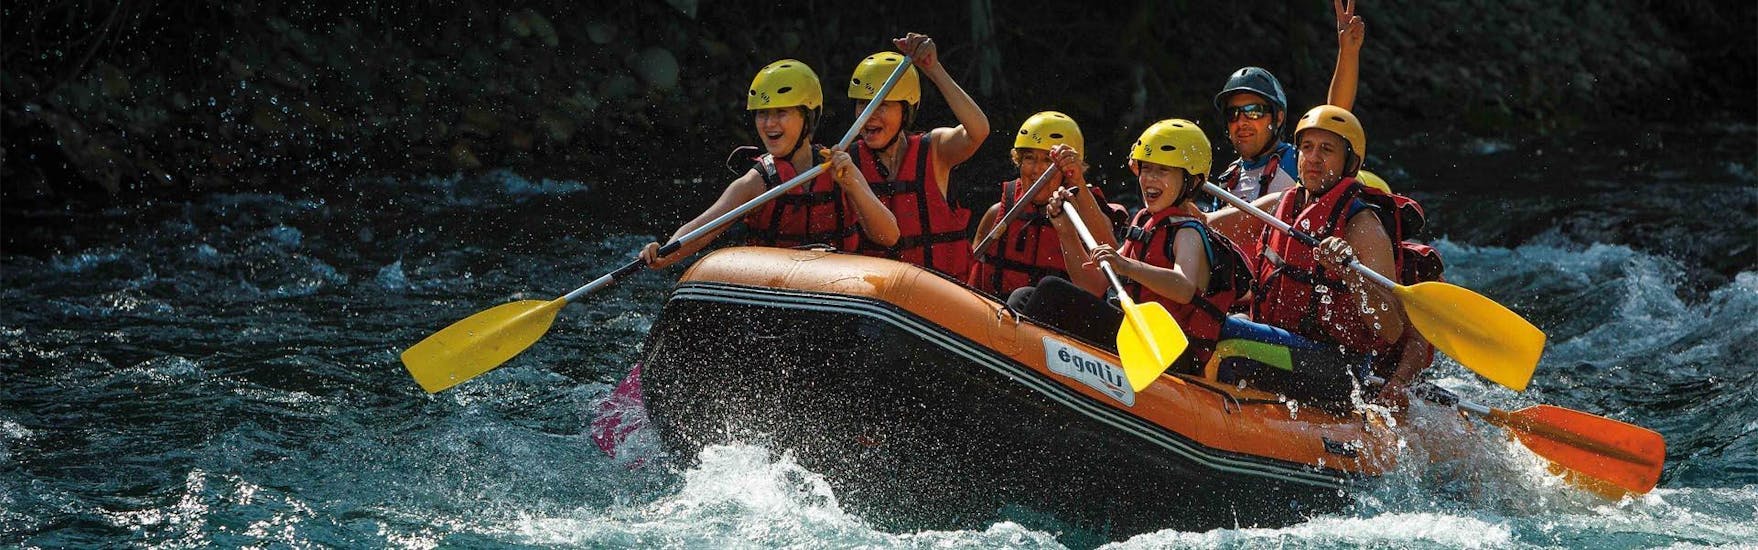 A group is having fun on his raft during the activity Rafting adventure on the Garonne with H2O vives.